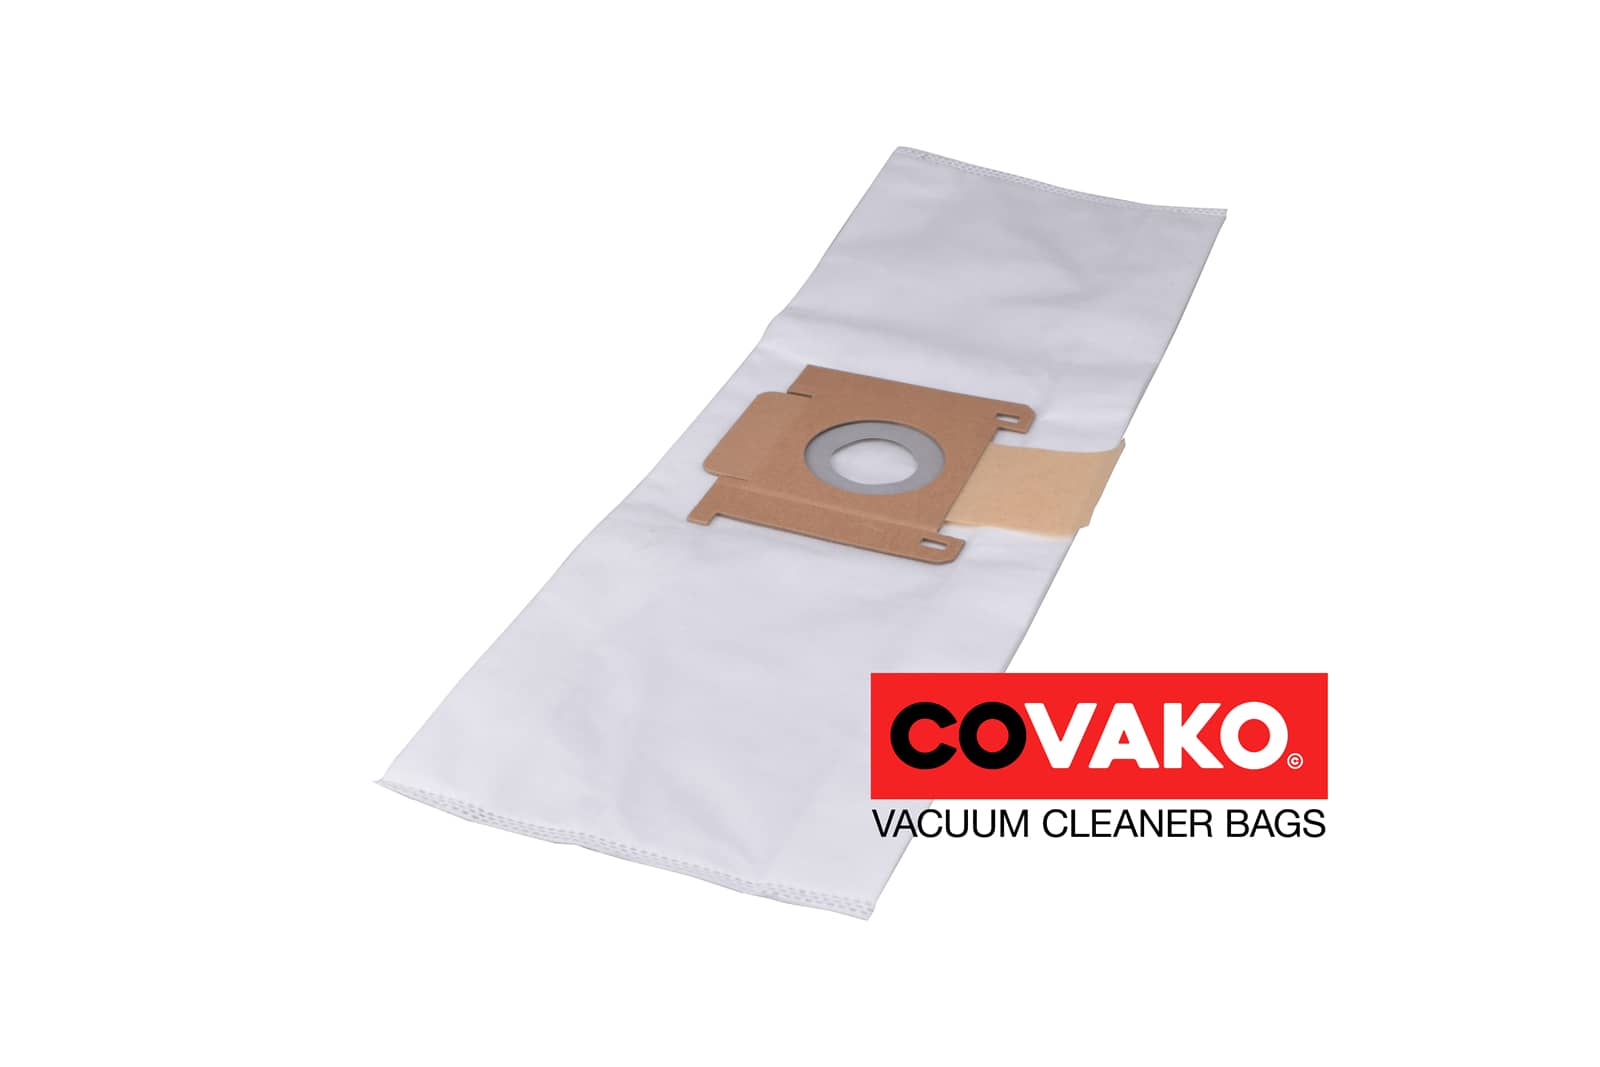 Comac i-vac 6 / Synthesis - Comac vacuum cleaner bags